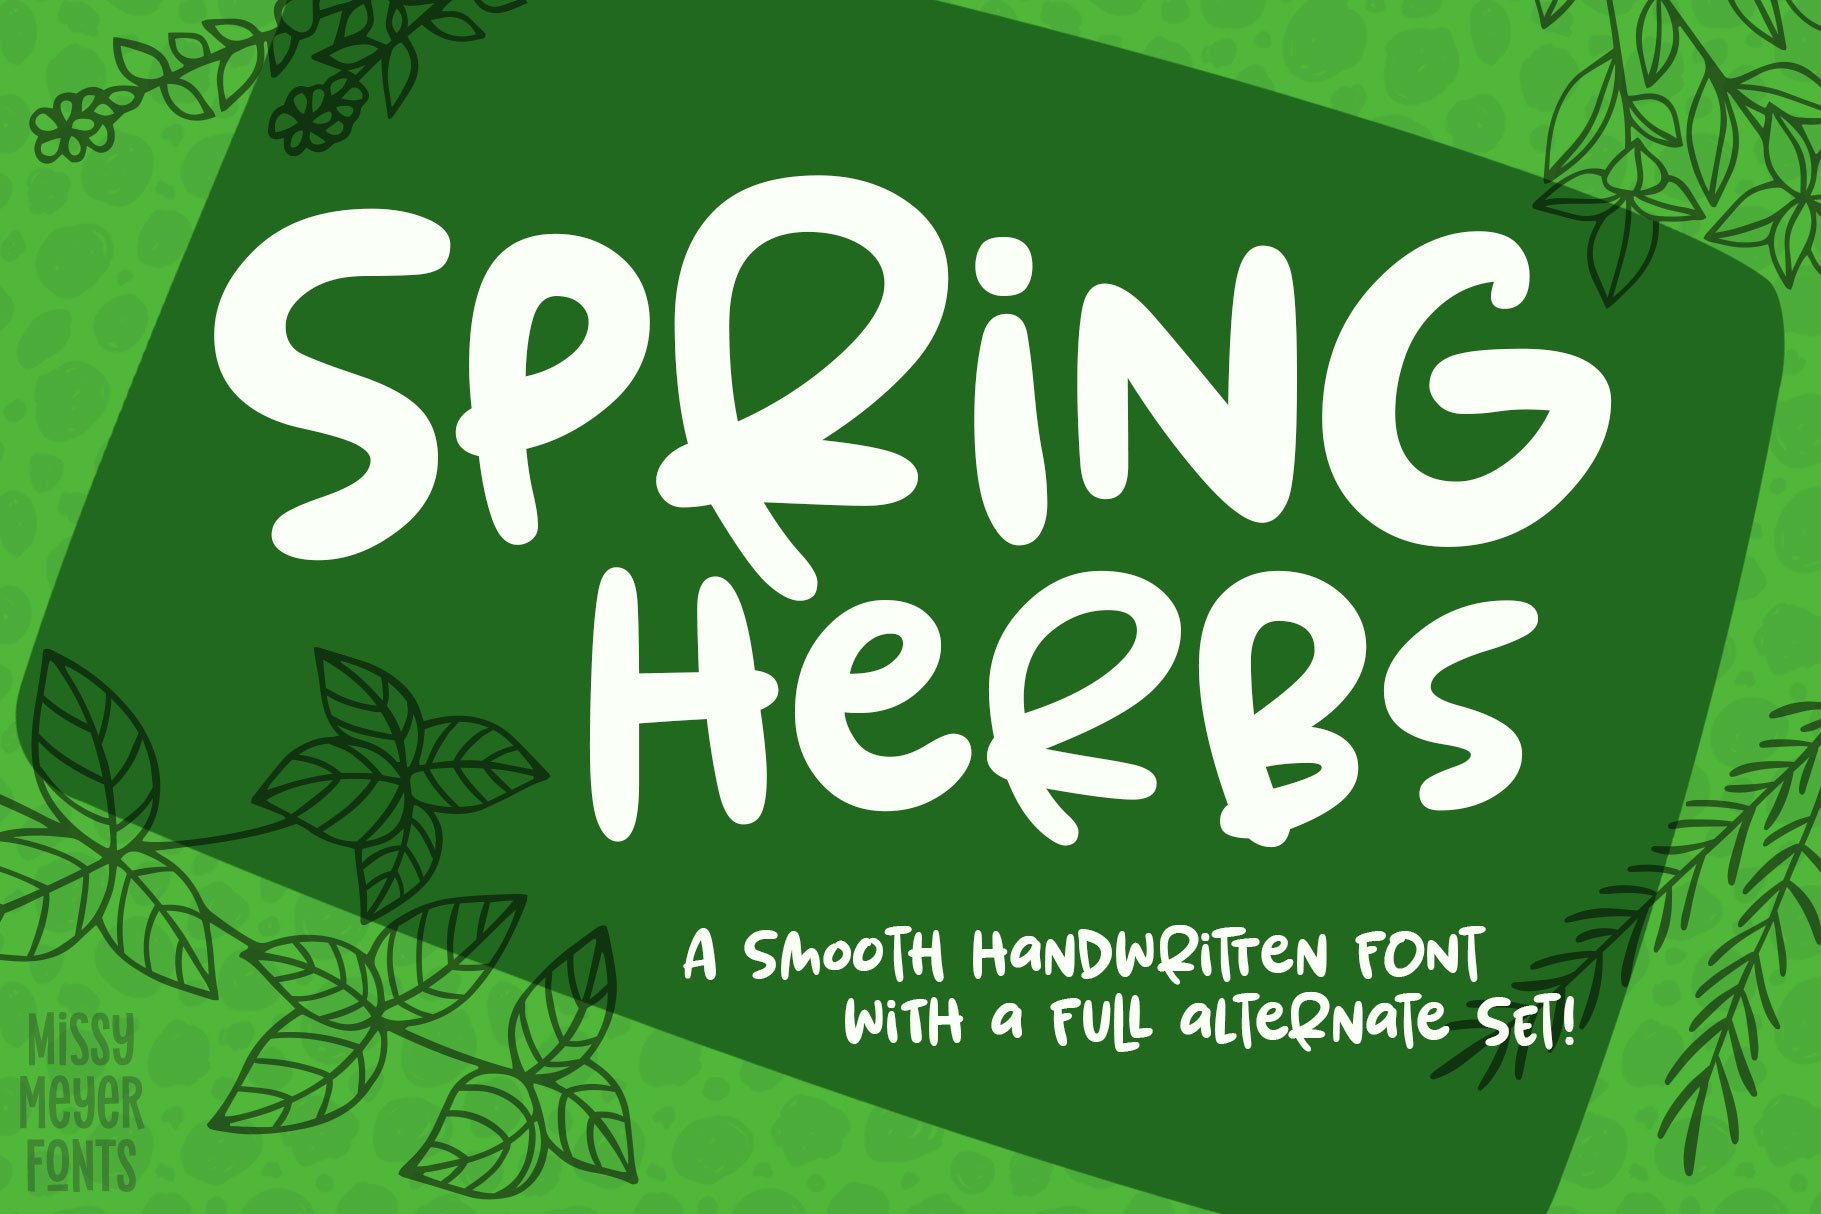 Spring Herbs: a fun bouncy font! cover image.